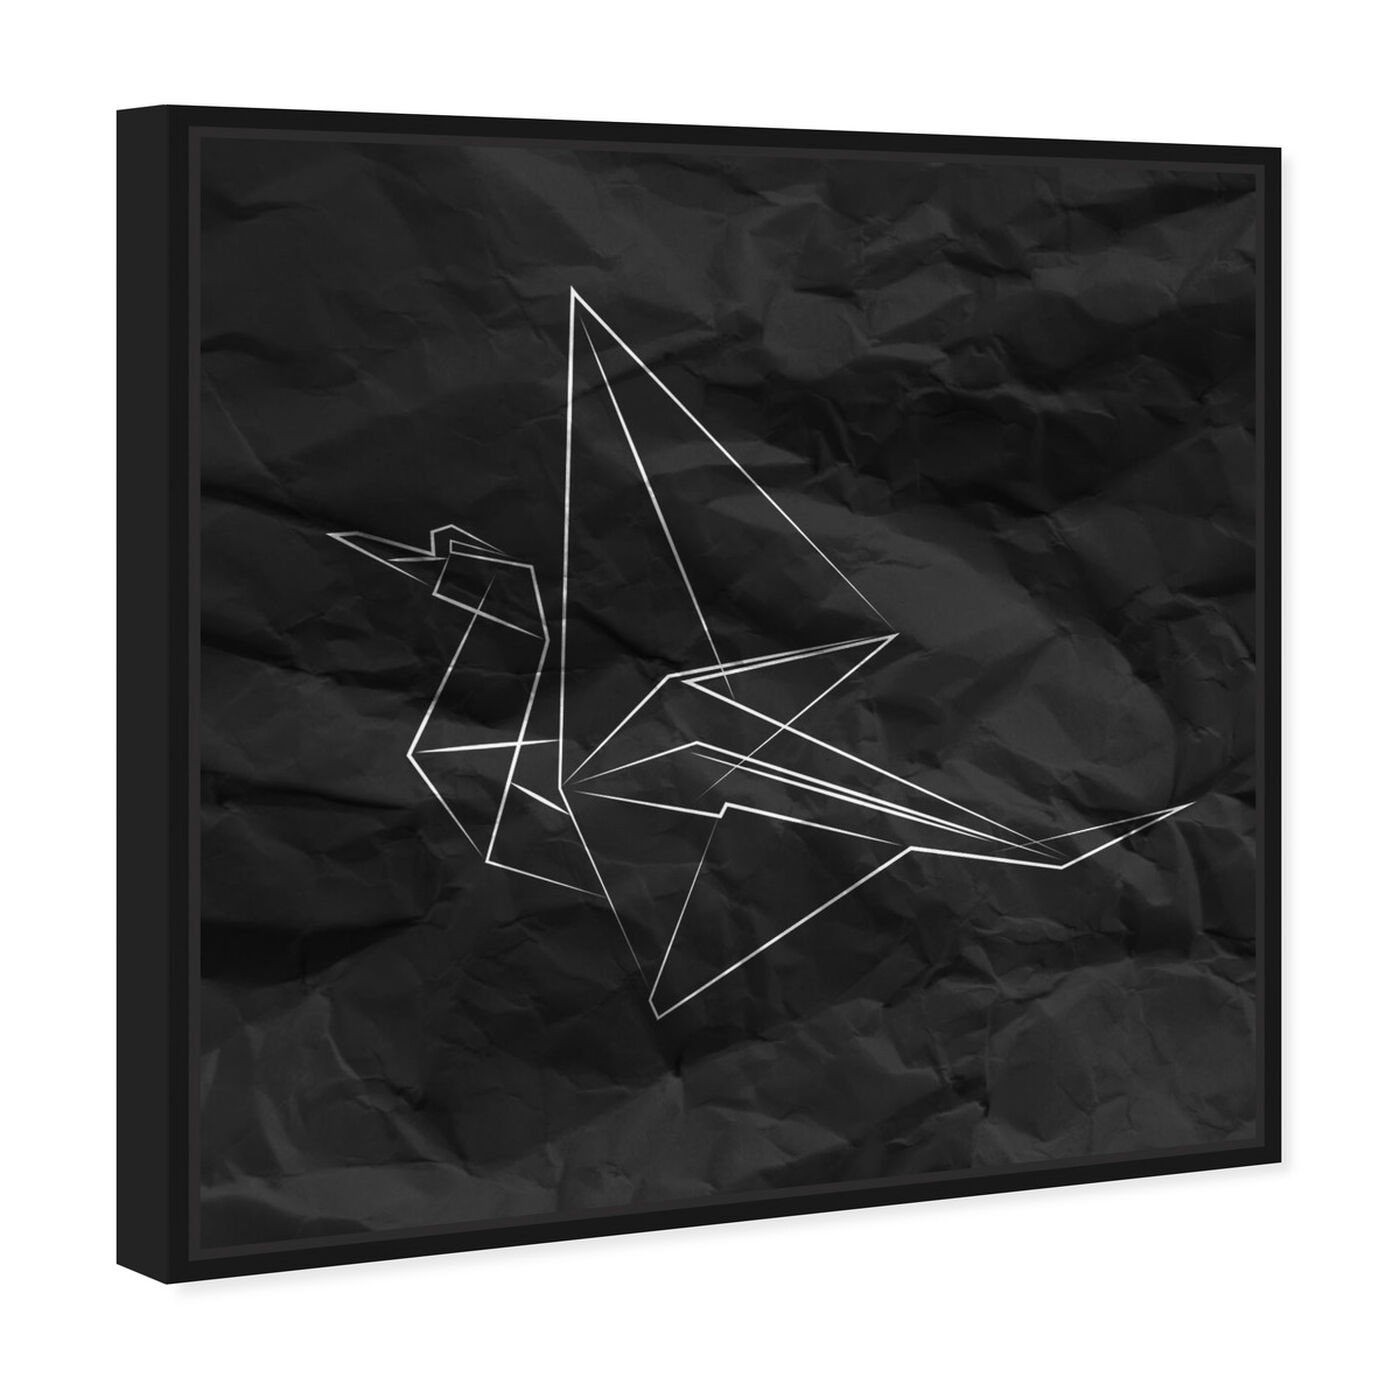 Angled view of Origami Crane featuring abstract and geometric art.